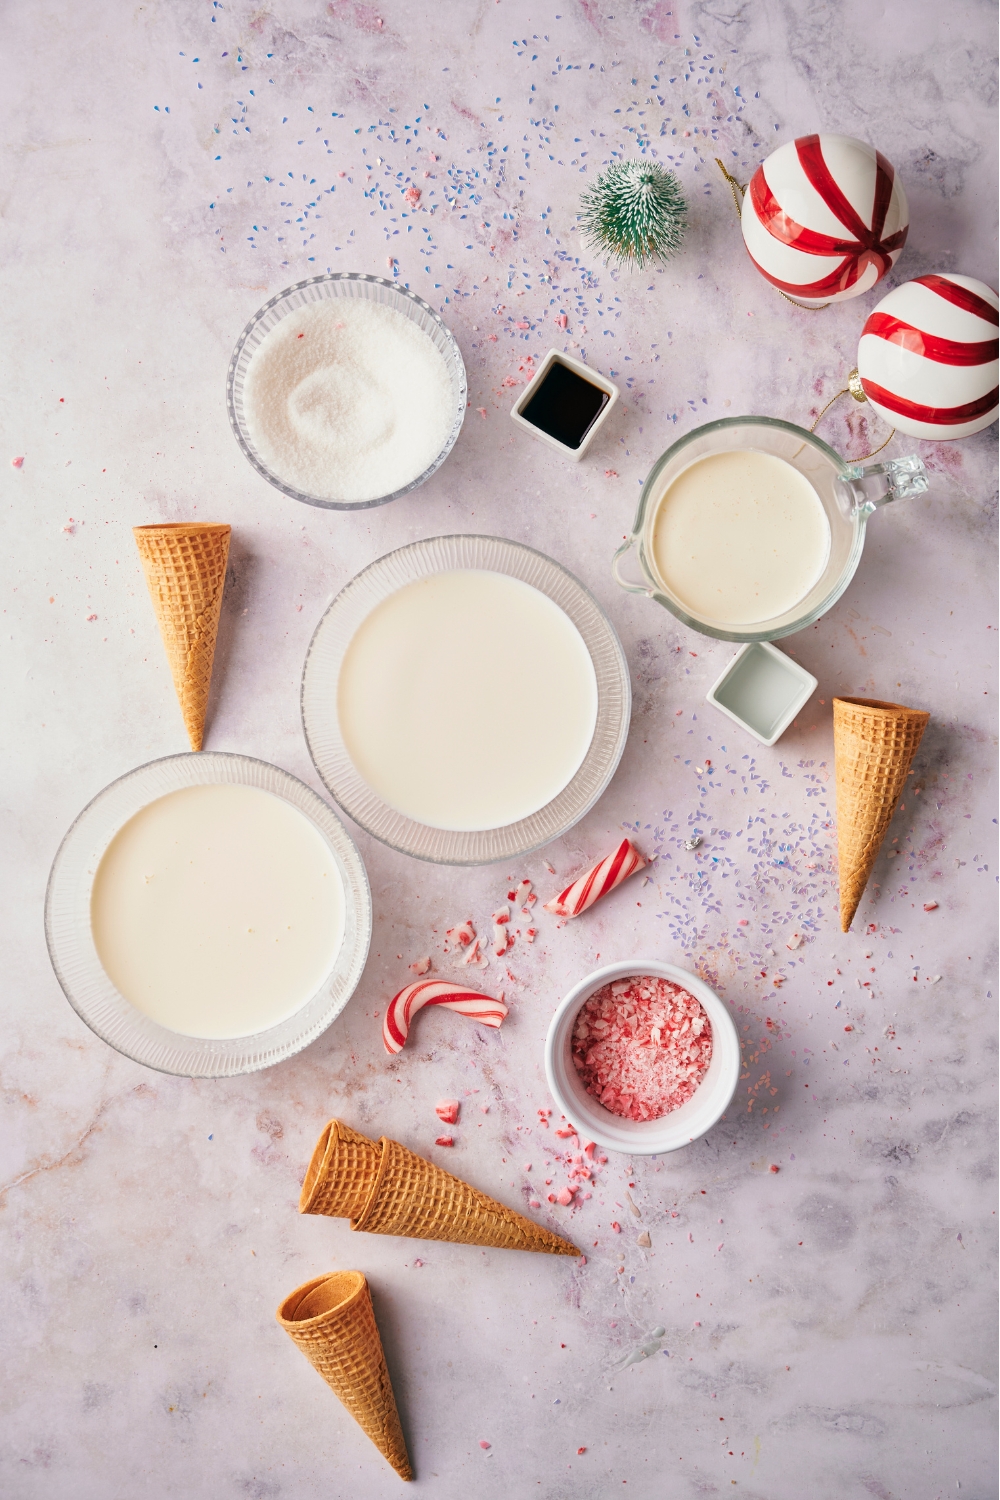 An assortment of ingredients including bowls of milk, cream, vanilla extract, sugar, ice cream cones, and crushed candy canes.